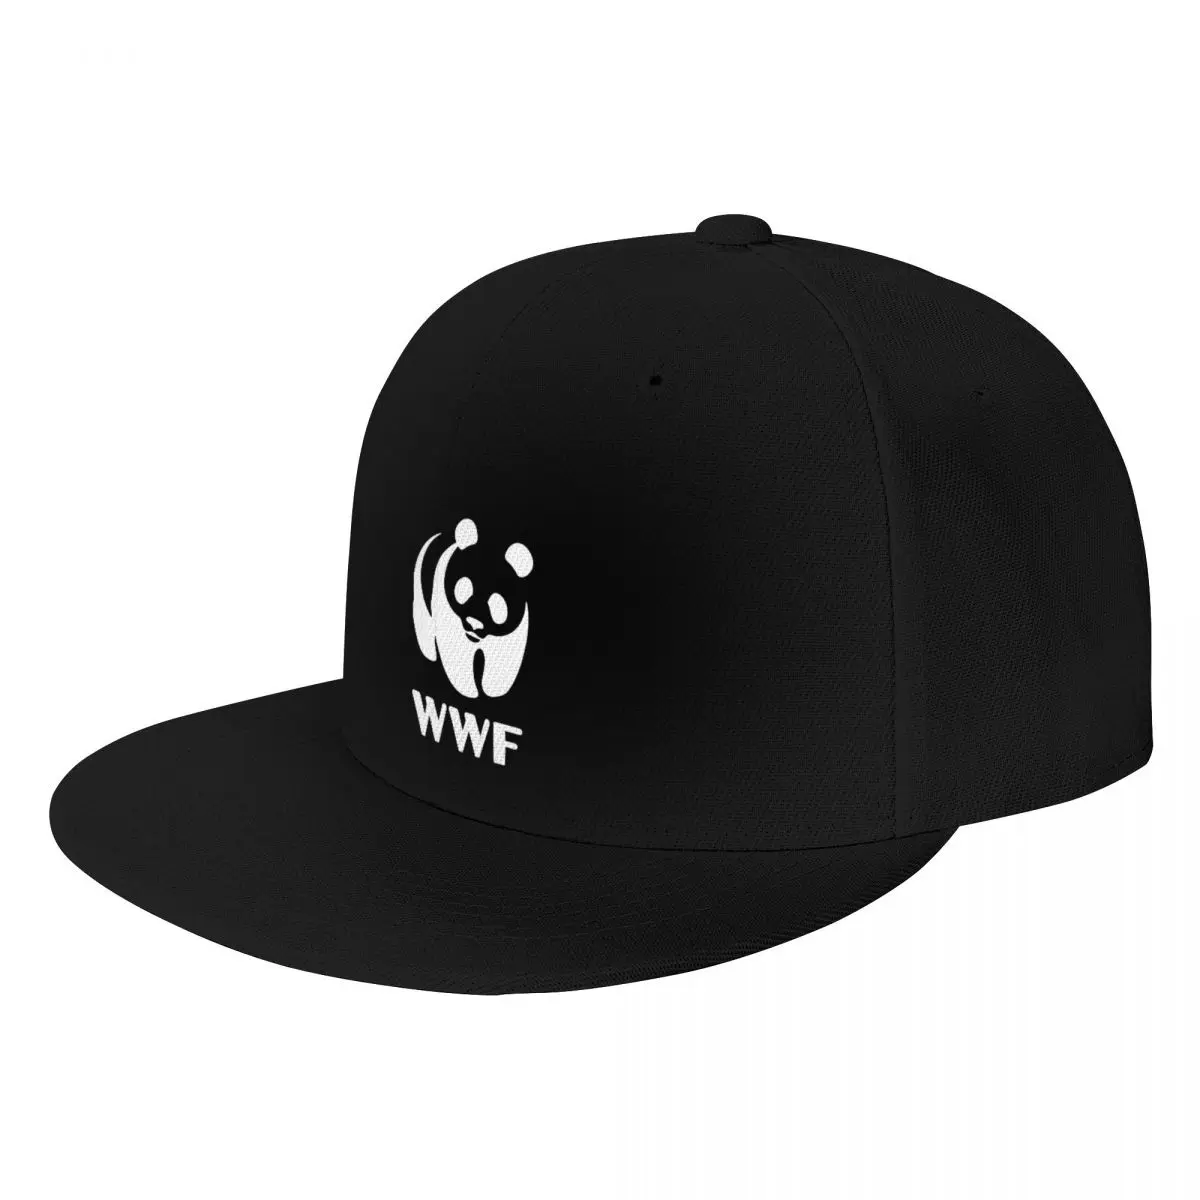 

World Wide Fund For Nature WWF Baseball cap Hip-hop Hats Outdoor Adjustable Casual Sunscreen Hats